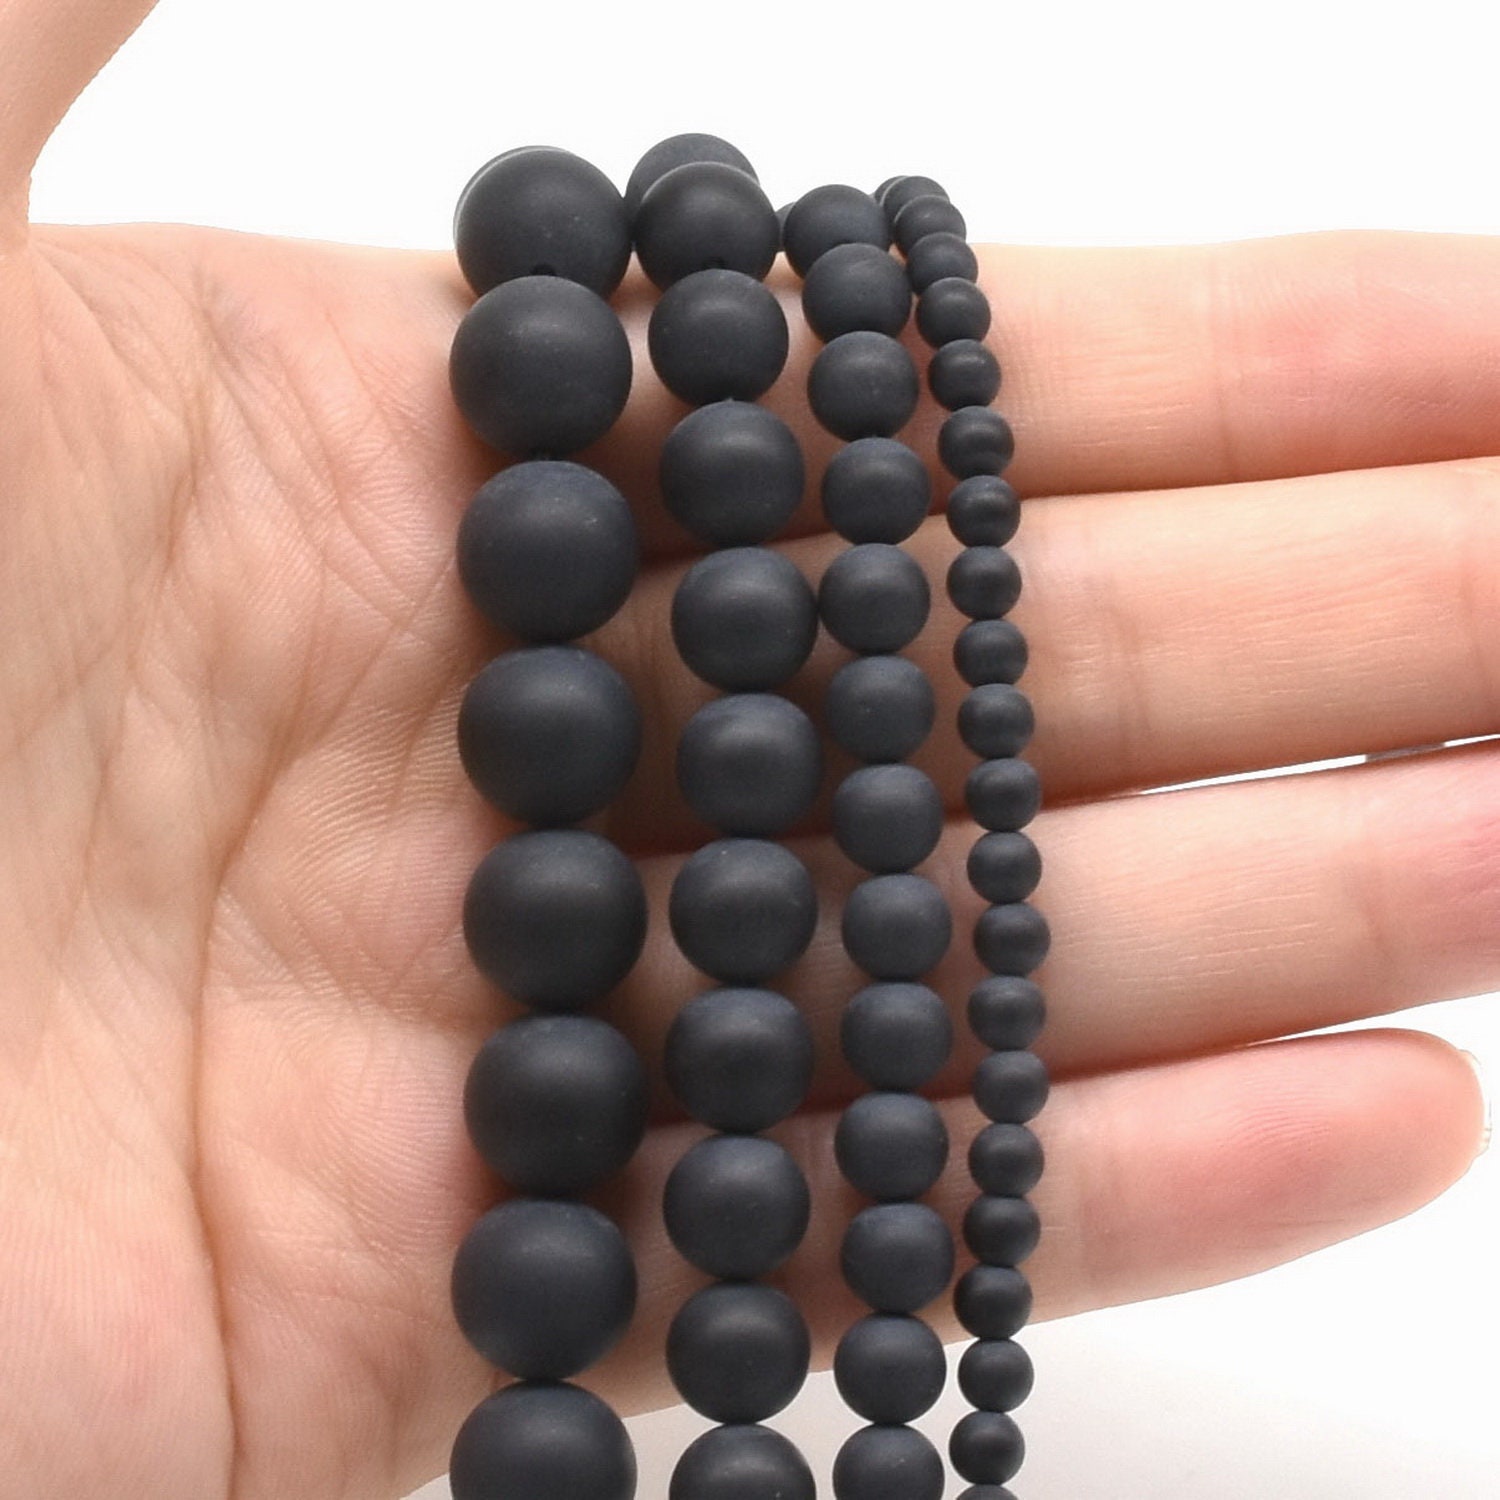 93PCS Black Snowflake Beads Natural Stone Beads for Jewelry Making, Round  Loose Stone Beads for Bracelets Necklace Earring Making for Women Girls